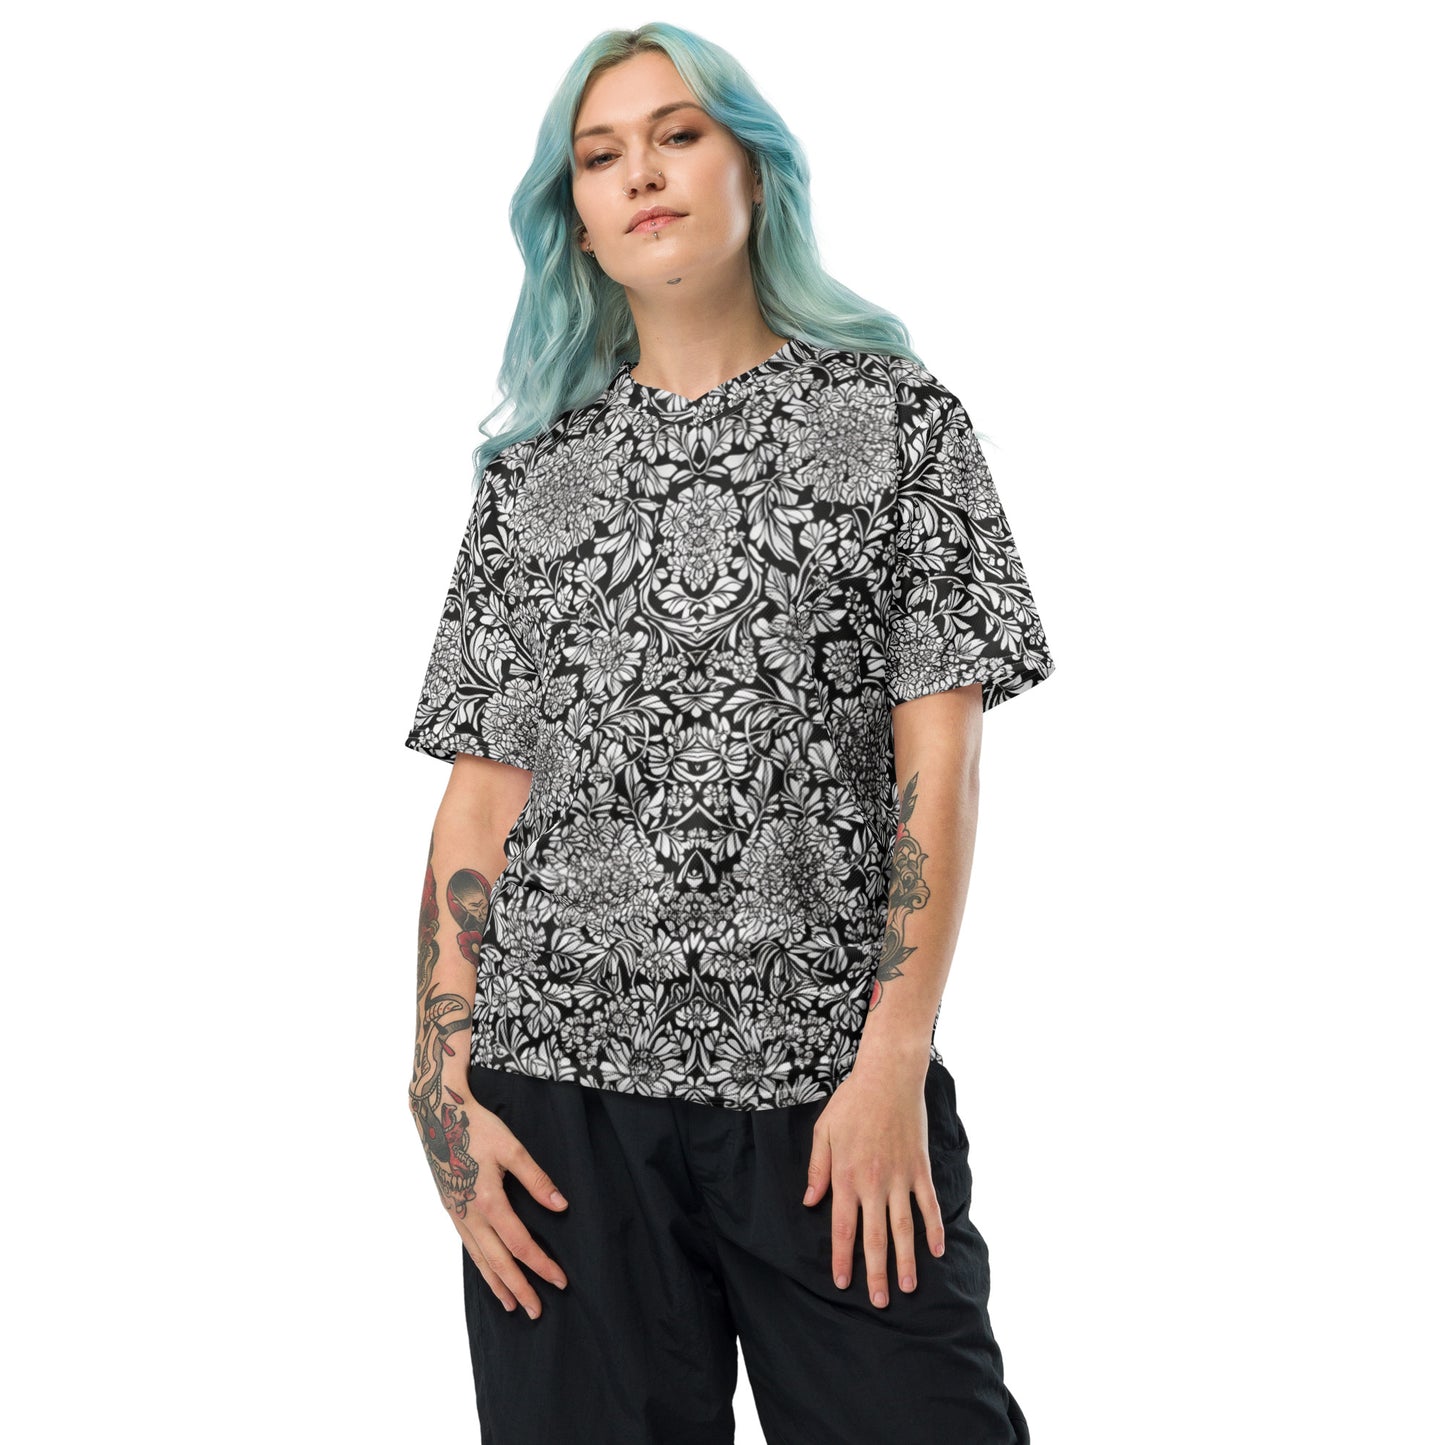 Monochrome Floral Recycled unisex sports jersey